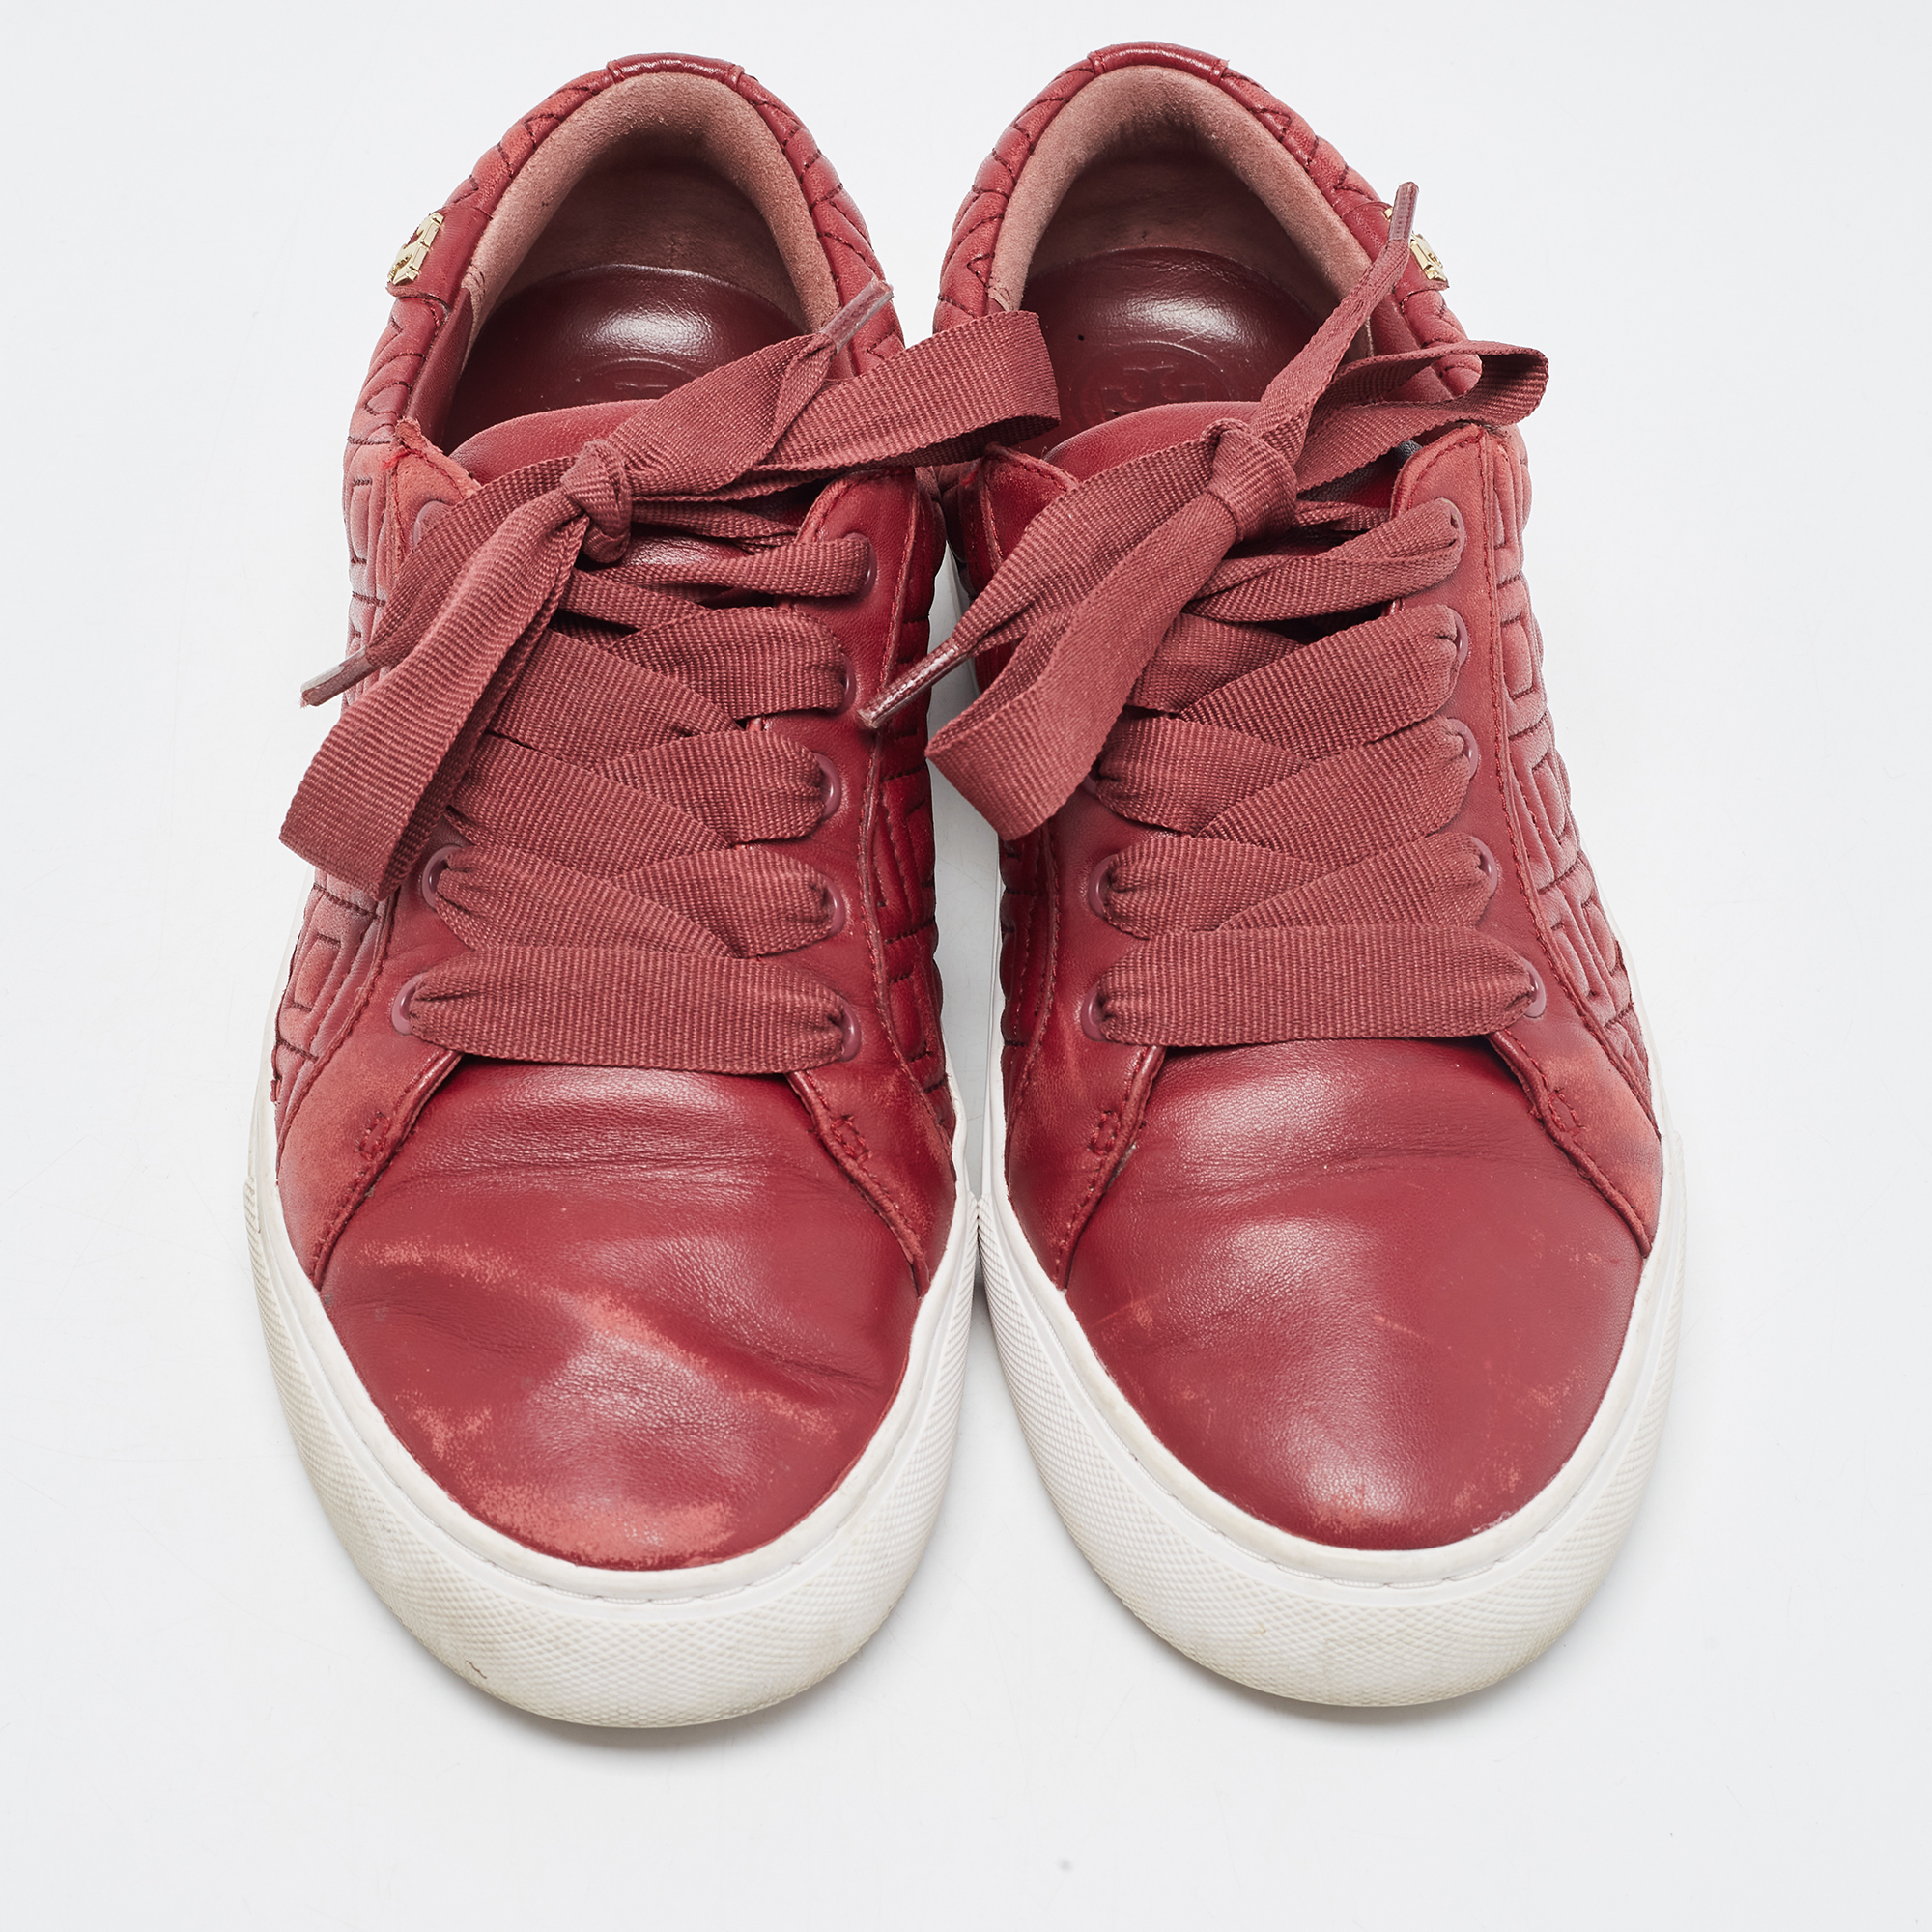 Tory Burch Red Quilted Leather Marion Lace Up Sneakers Size 38